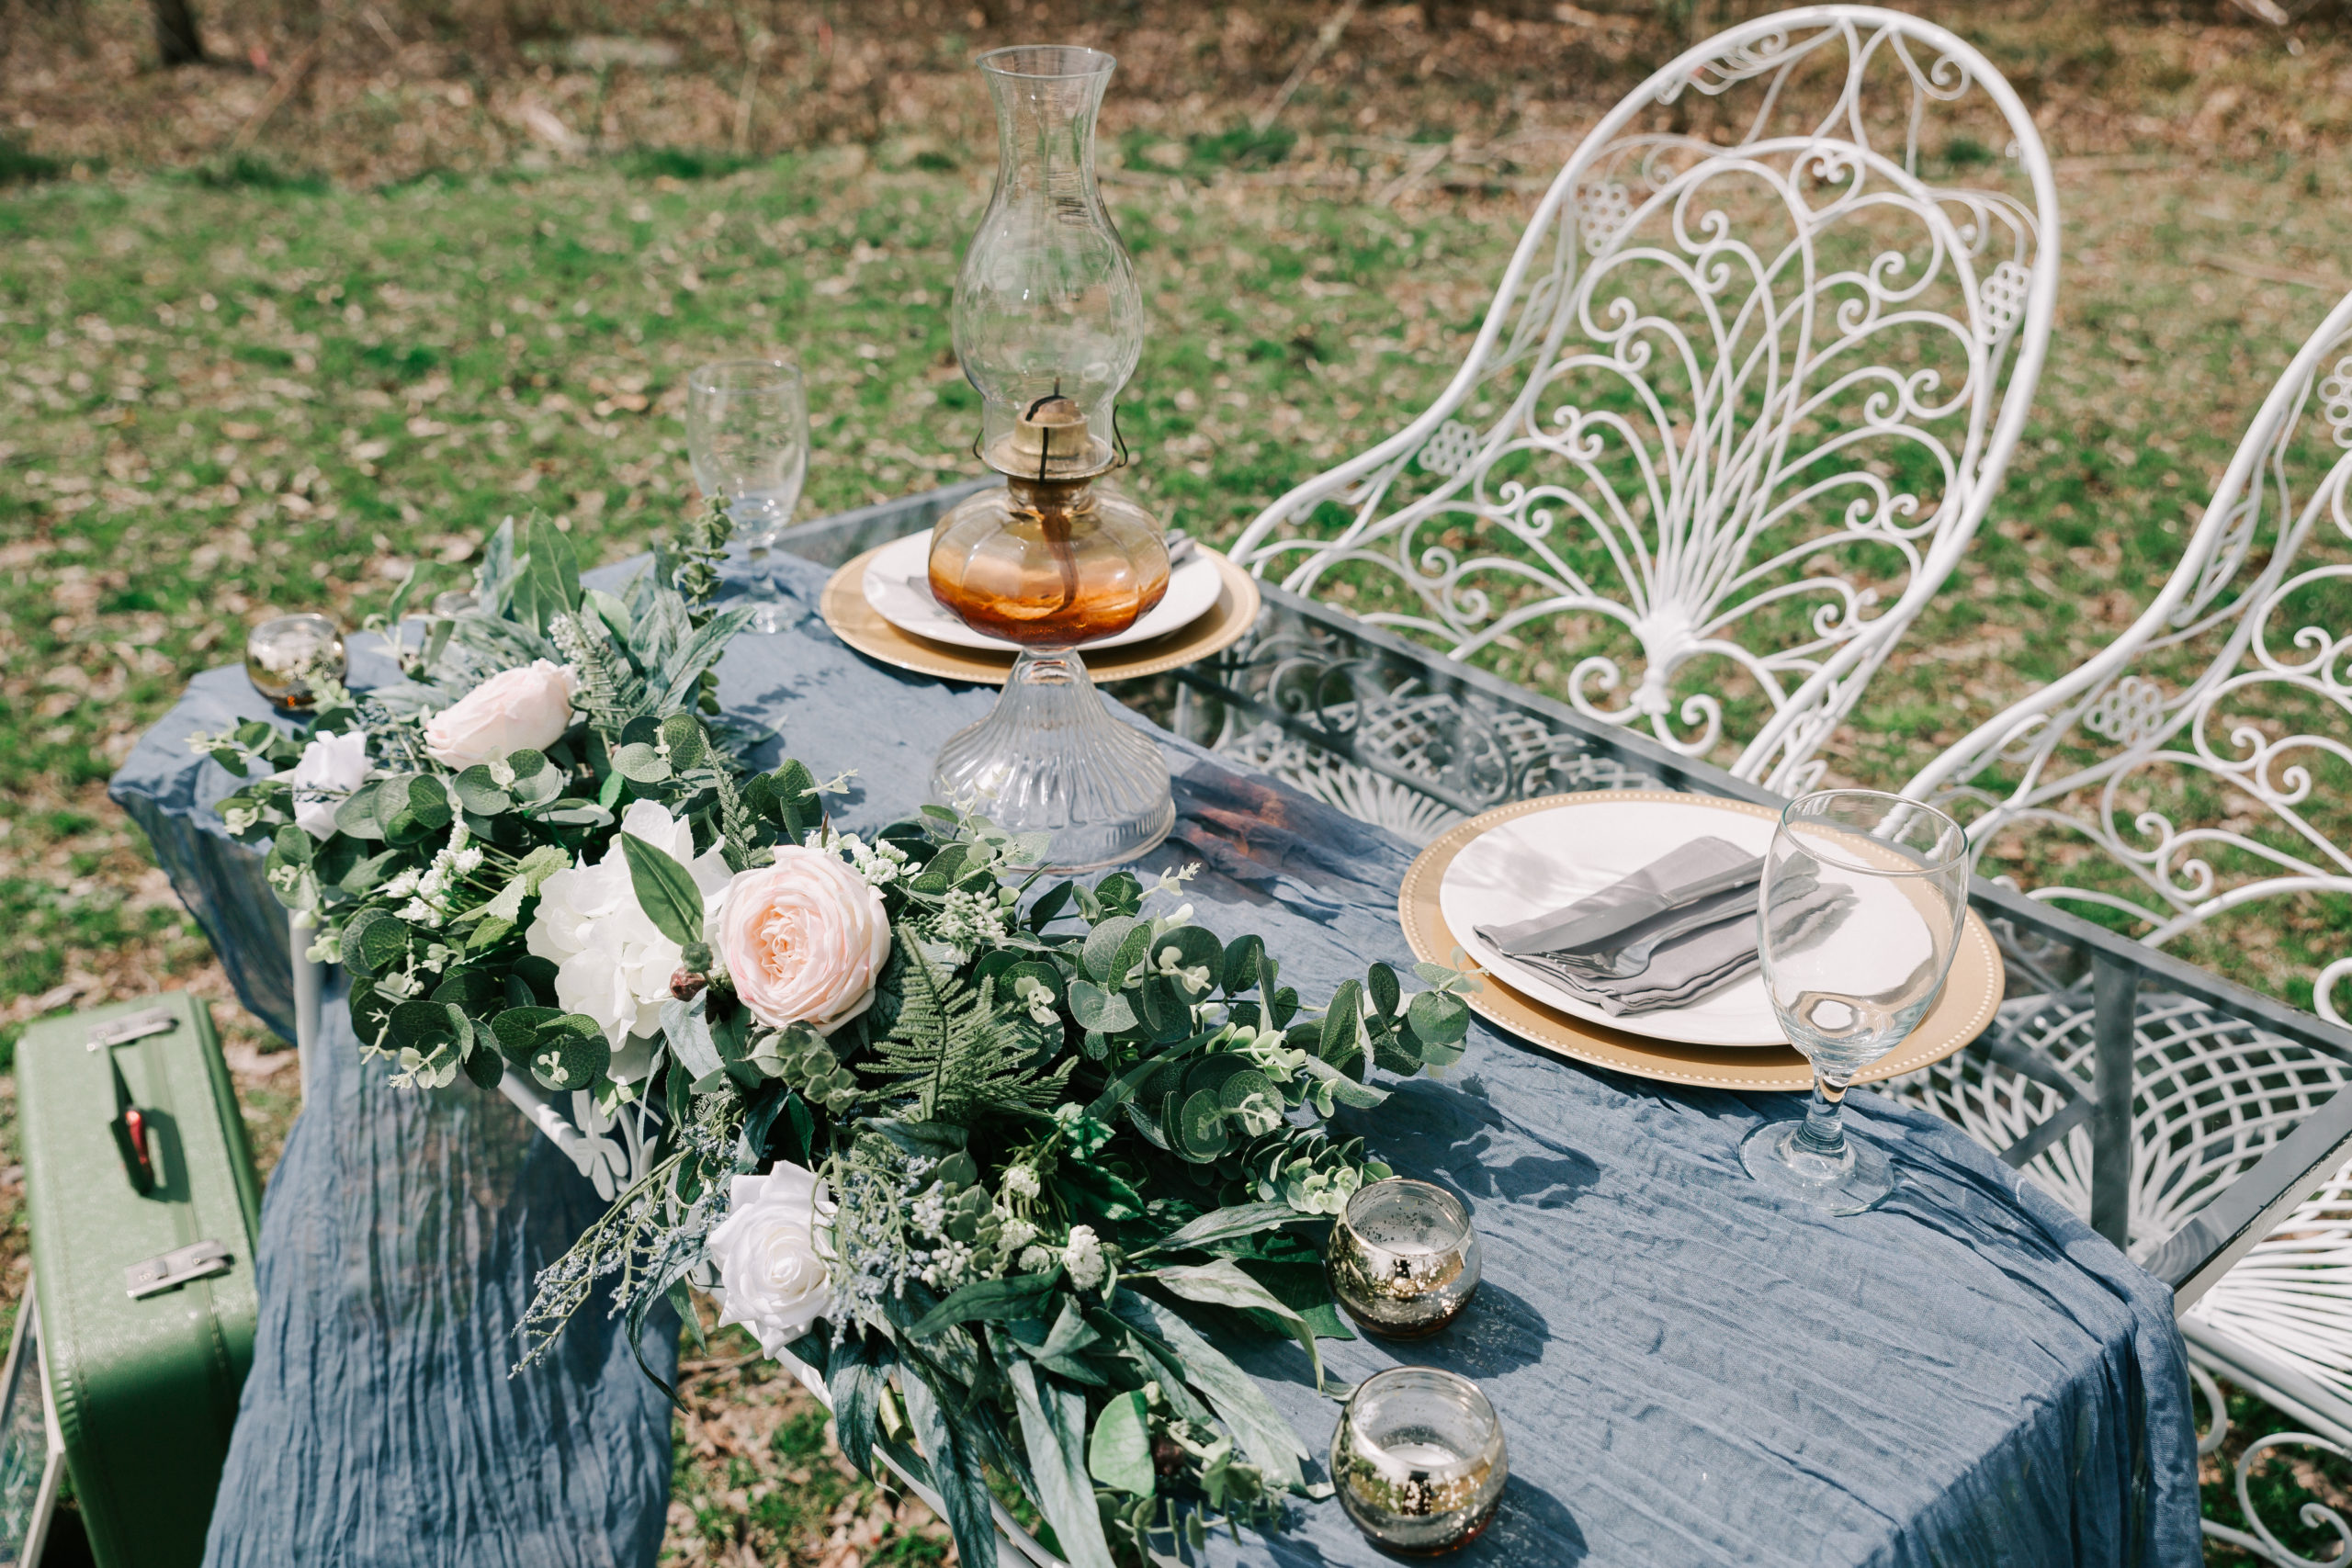 sweetheart table at a backyard wedding planned by Events by Amy Melody, a Massachusetts wedding planner